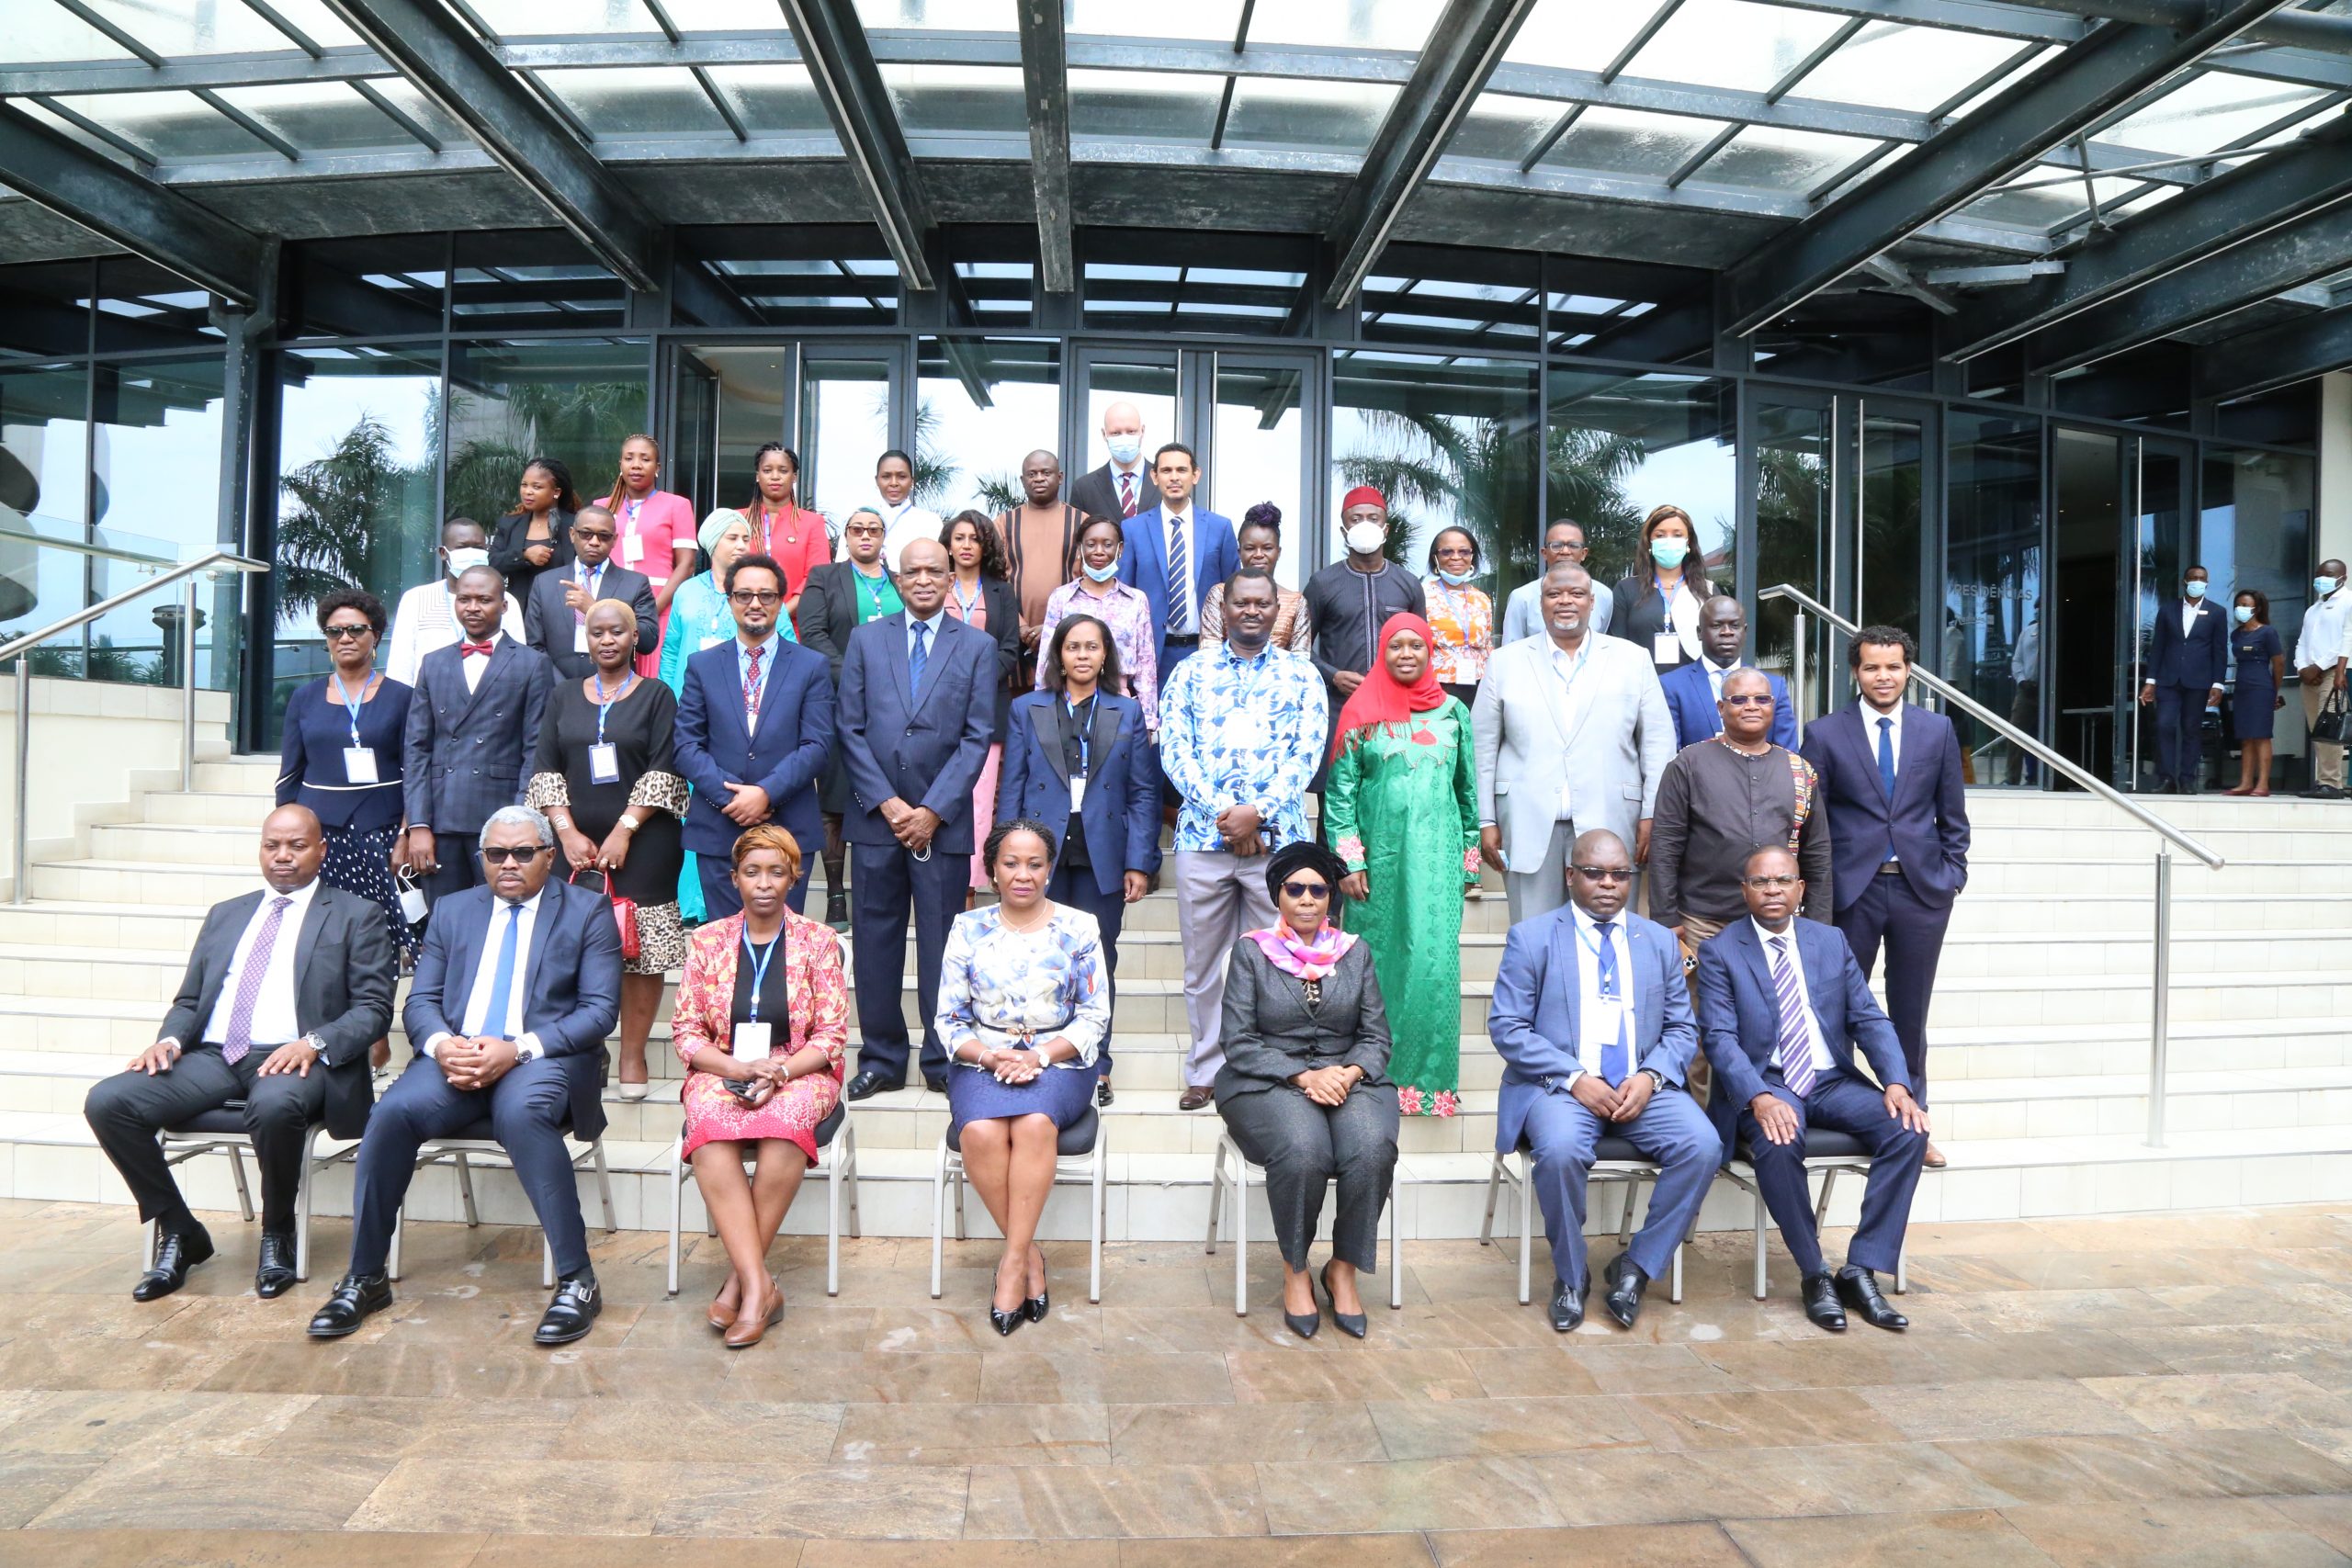 FIRST JOINT RETREAT OF THE LEGAL OFFICERS OF THE AFRICAN COMMISSION ON HUMAN AND PEOPLES’ RIGHTS, THE AFRICAN COURT ON HUMAN AND PEOPLES’ RIGHTS AND AFRICAN COMMITTEE OF EXPERTS ON THE RIGHTS AND WELFARE OF THE CHILD